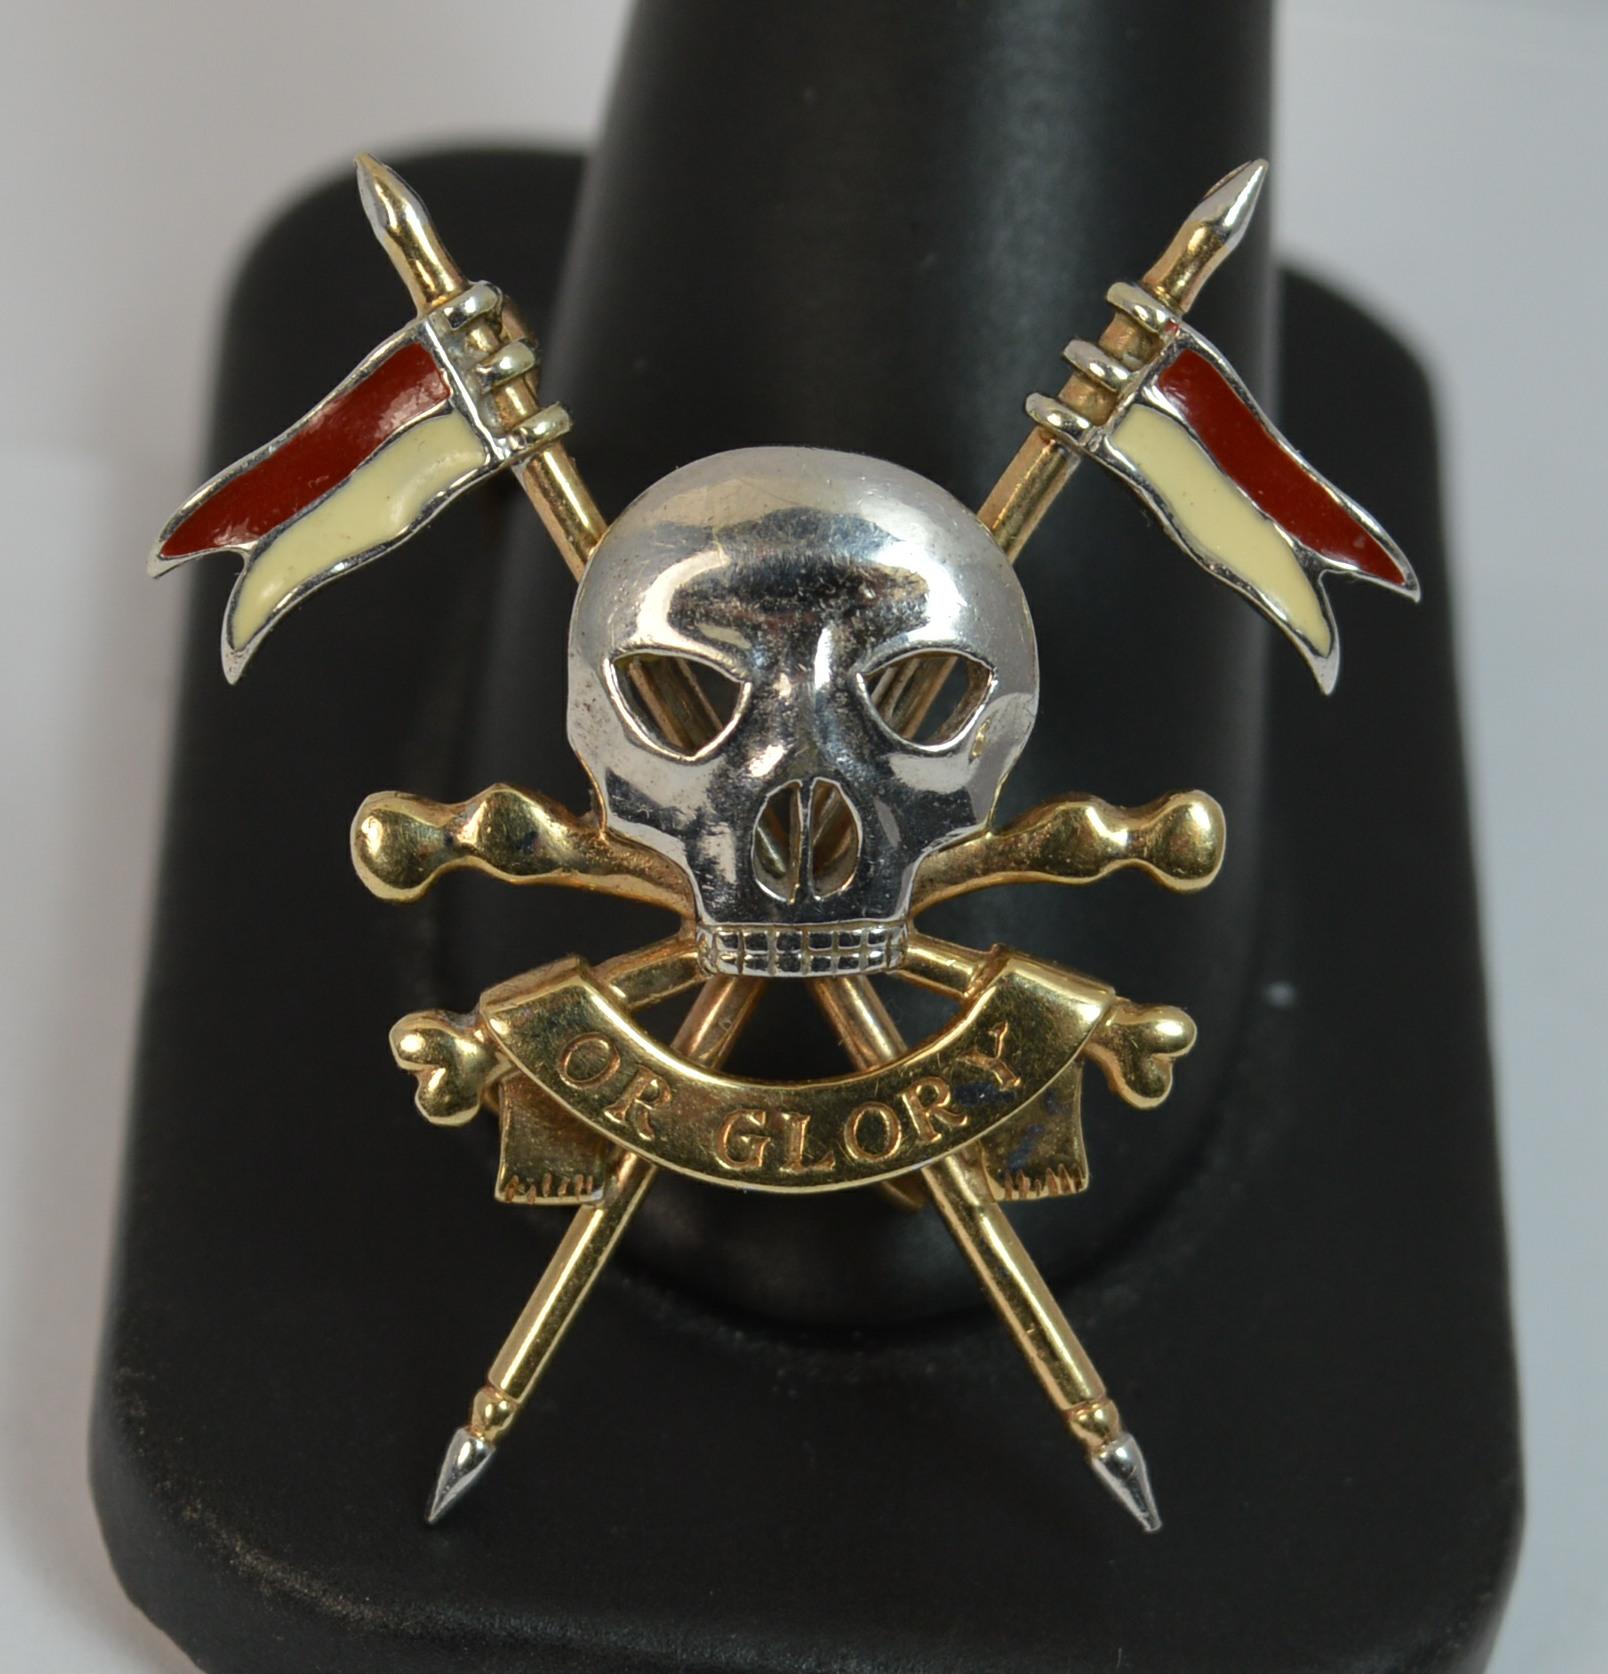 
A great quality skull brooch.

Solid 9 carat yellow gold brooch with a large skull to the centre in white gold. 

The large skull is to the forefront with bones below and a banner to read Or Glory. The background is of a spear flag of red and cream